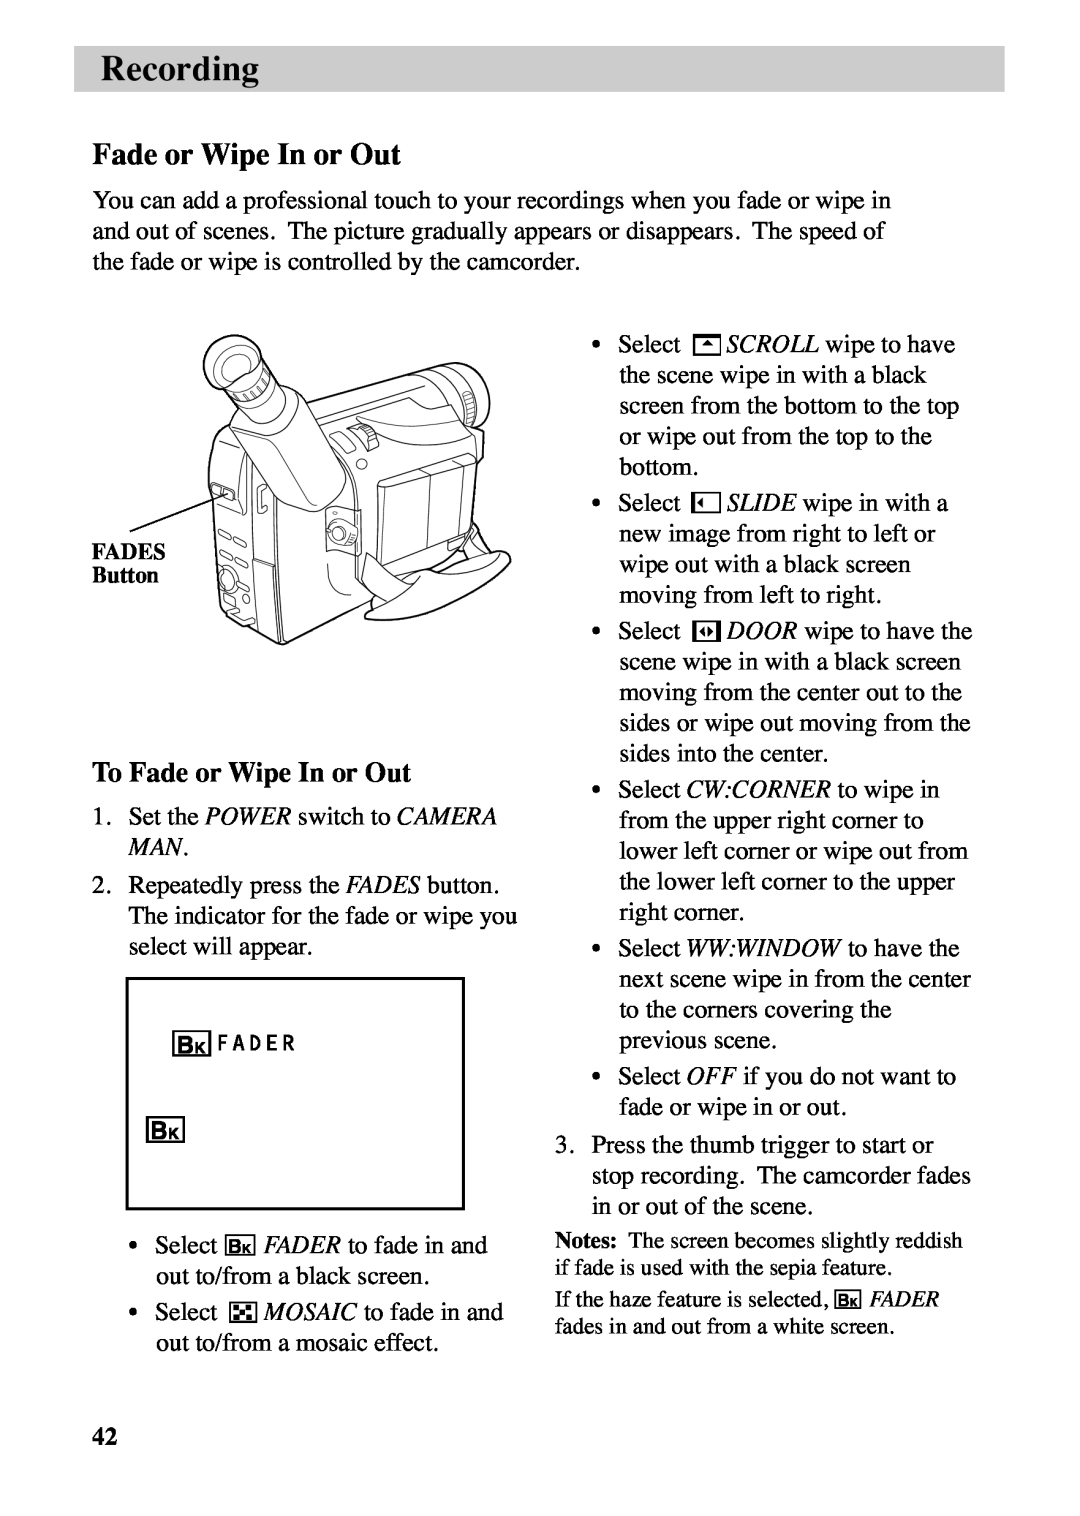 RCA CC6263 manual To Fade or Wipe In or Out, Recording 